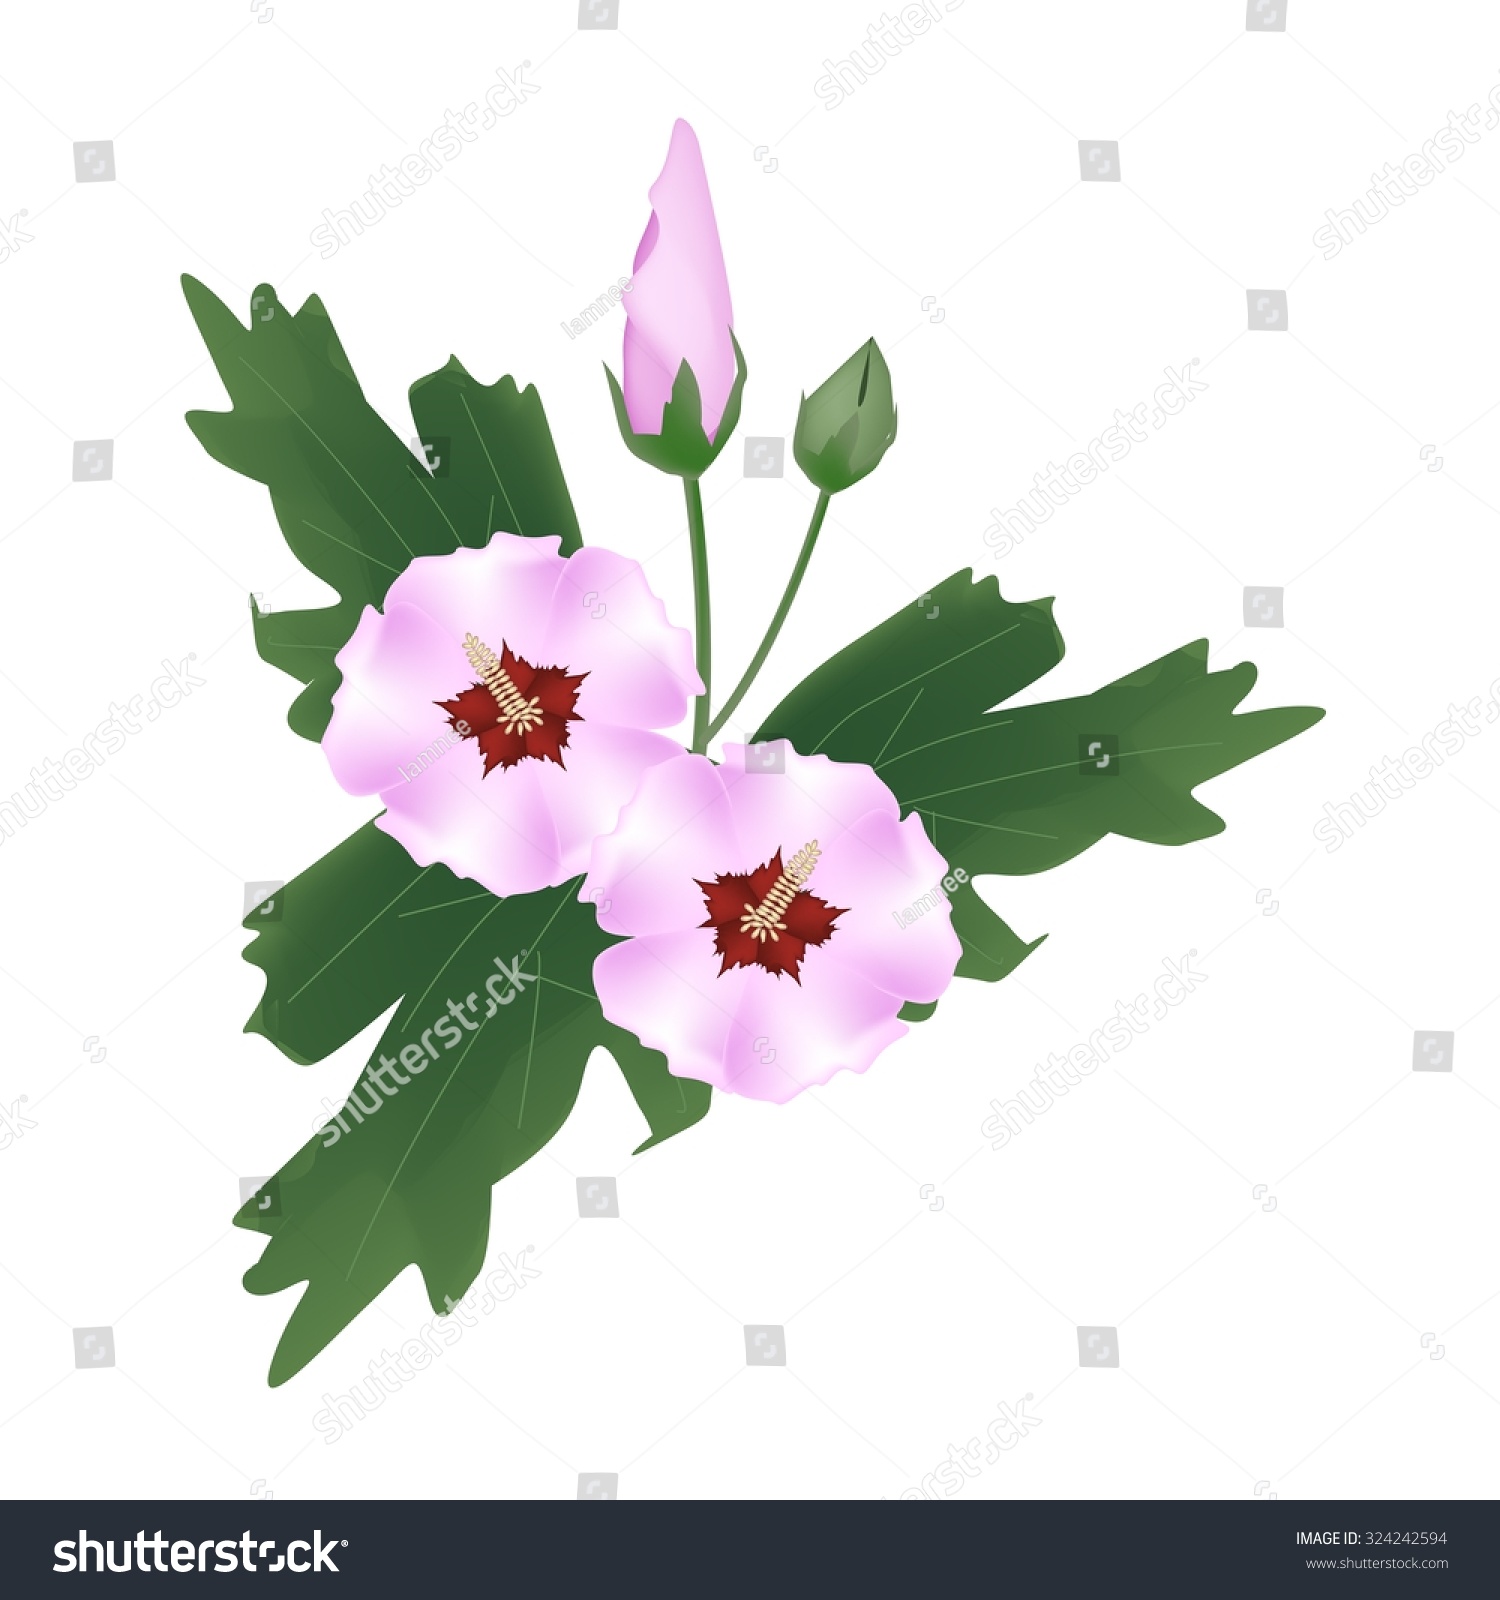 clipart rose of sharon - photo #50